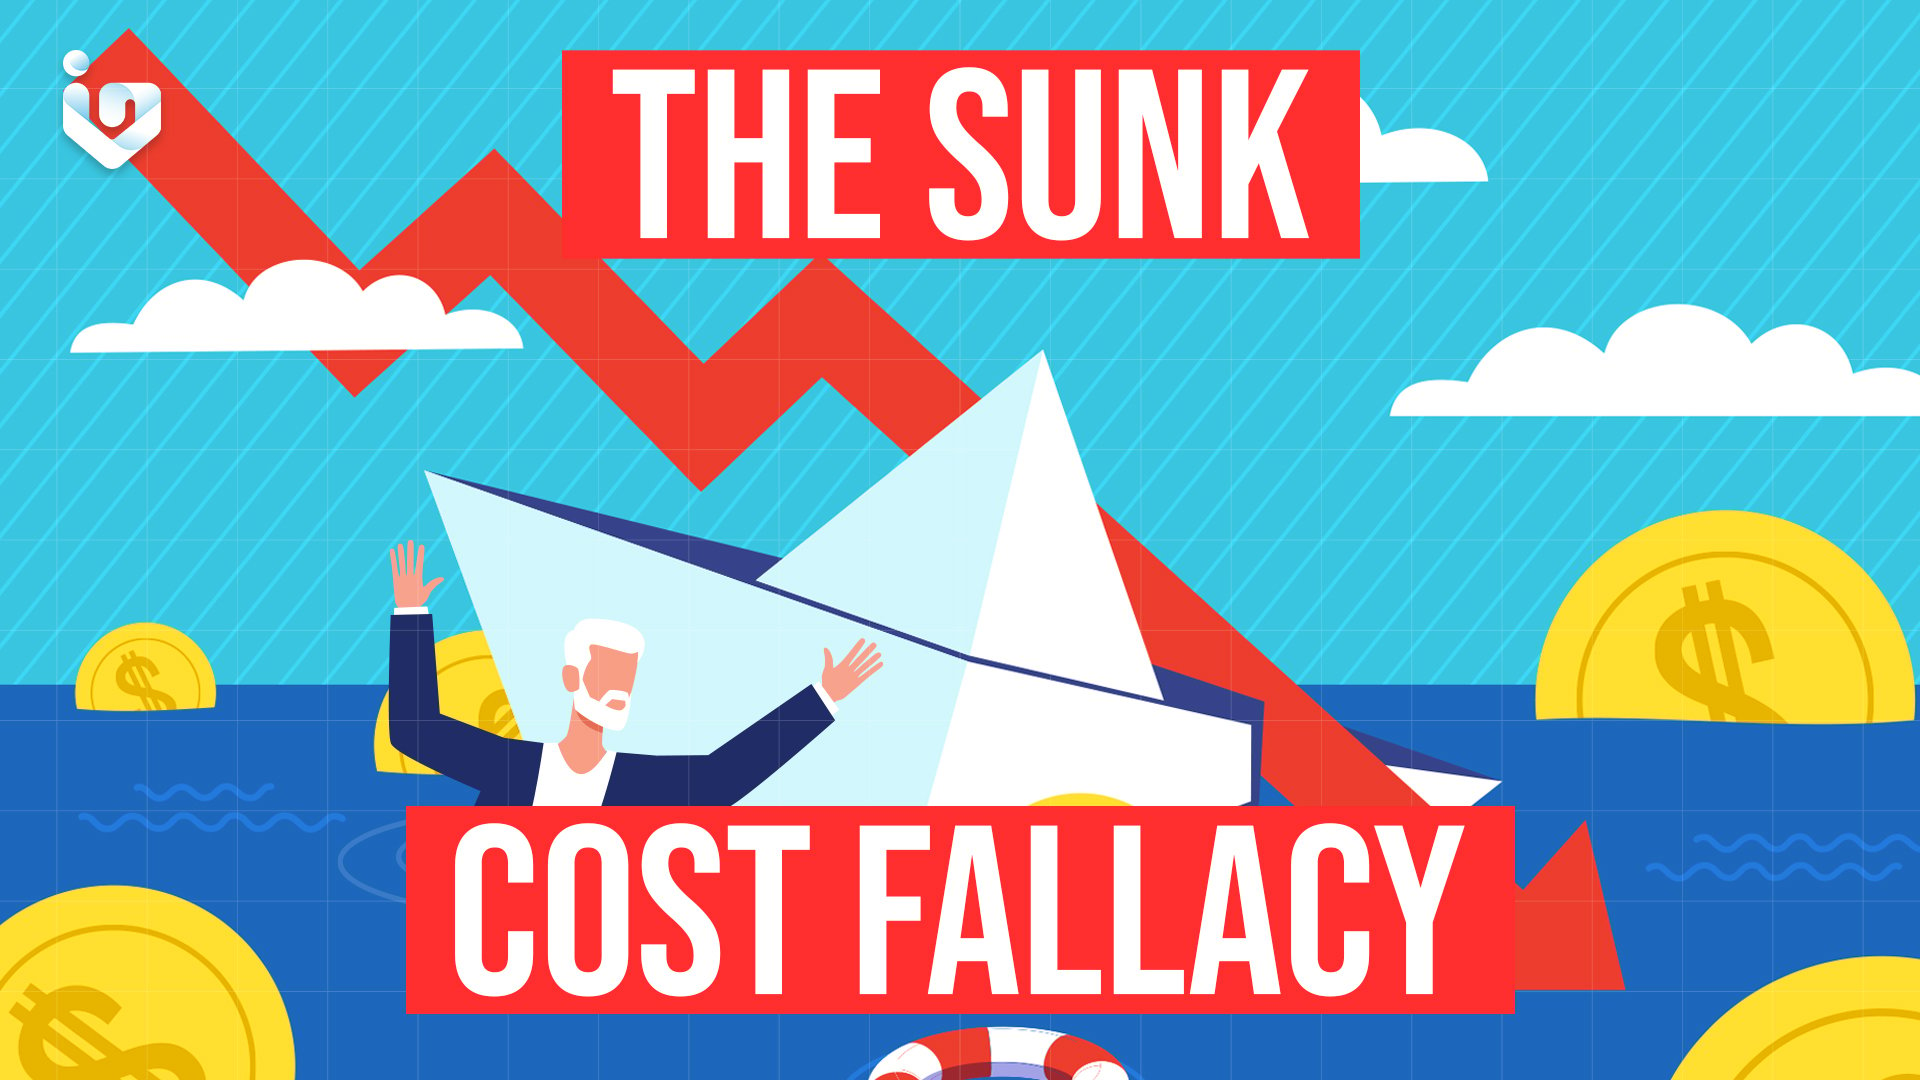 The Sunk Cost Fallacy